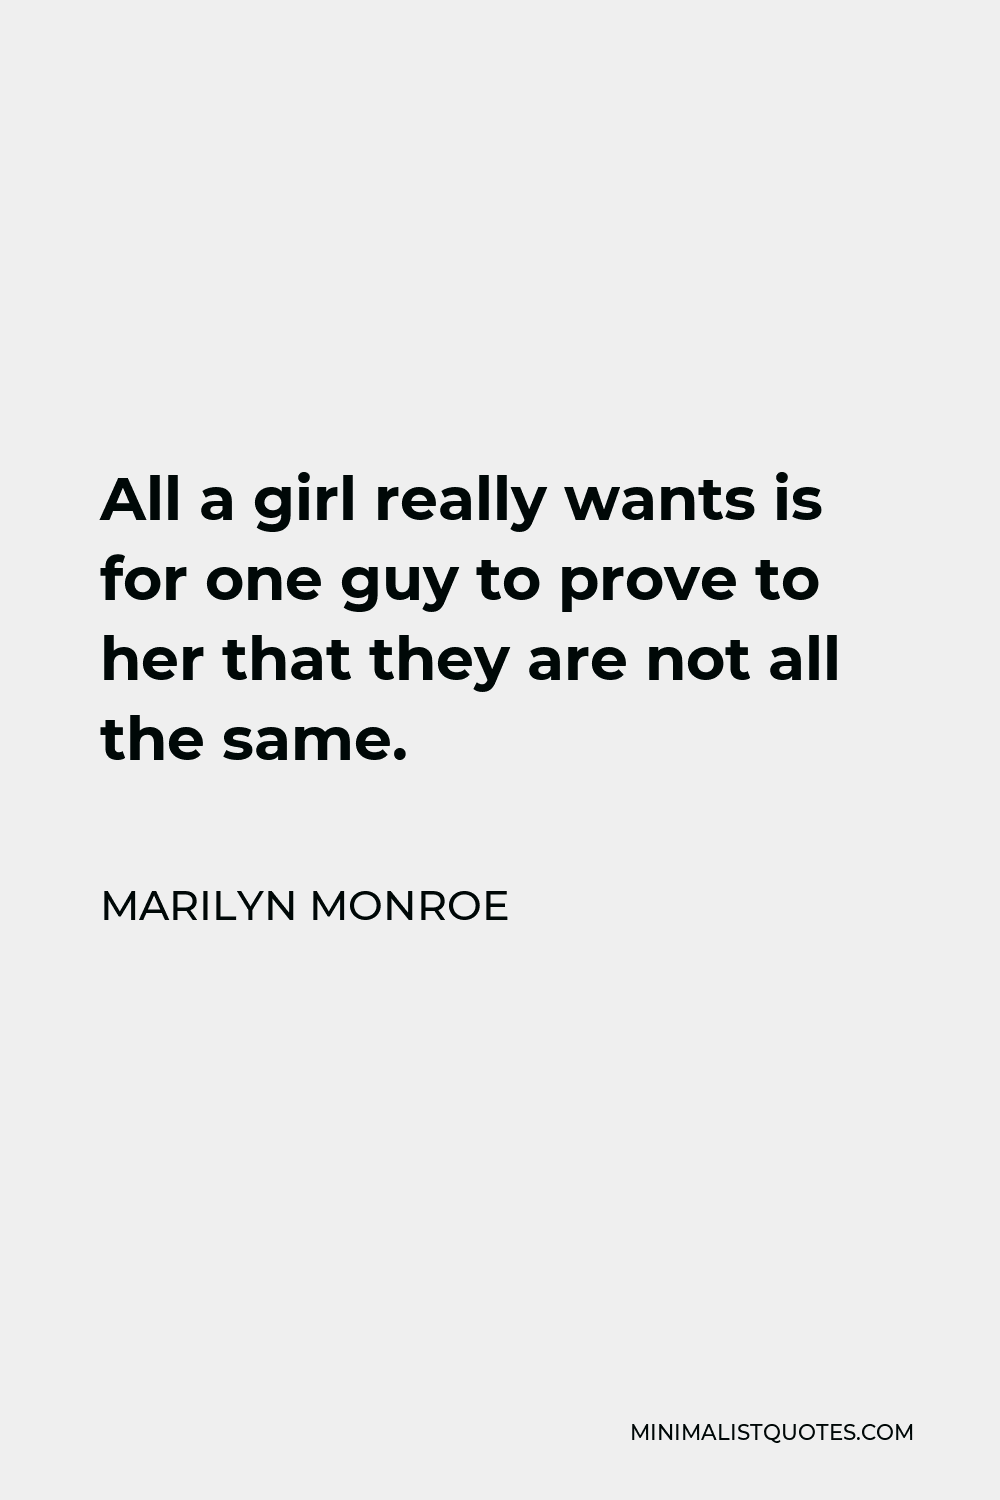 Marilyn Monroe Quote - All a girl really wants is for one guy to prove to her that they are not all the same.